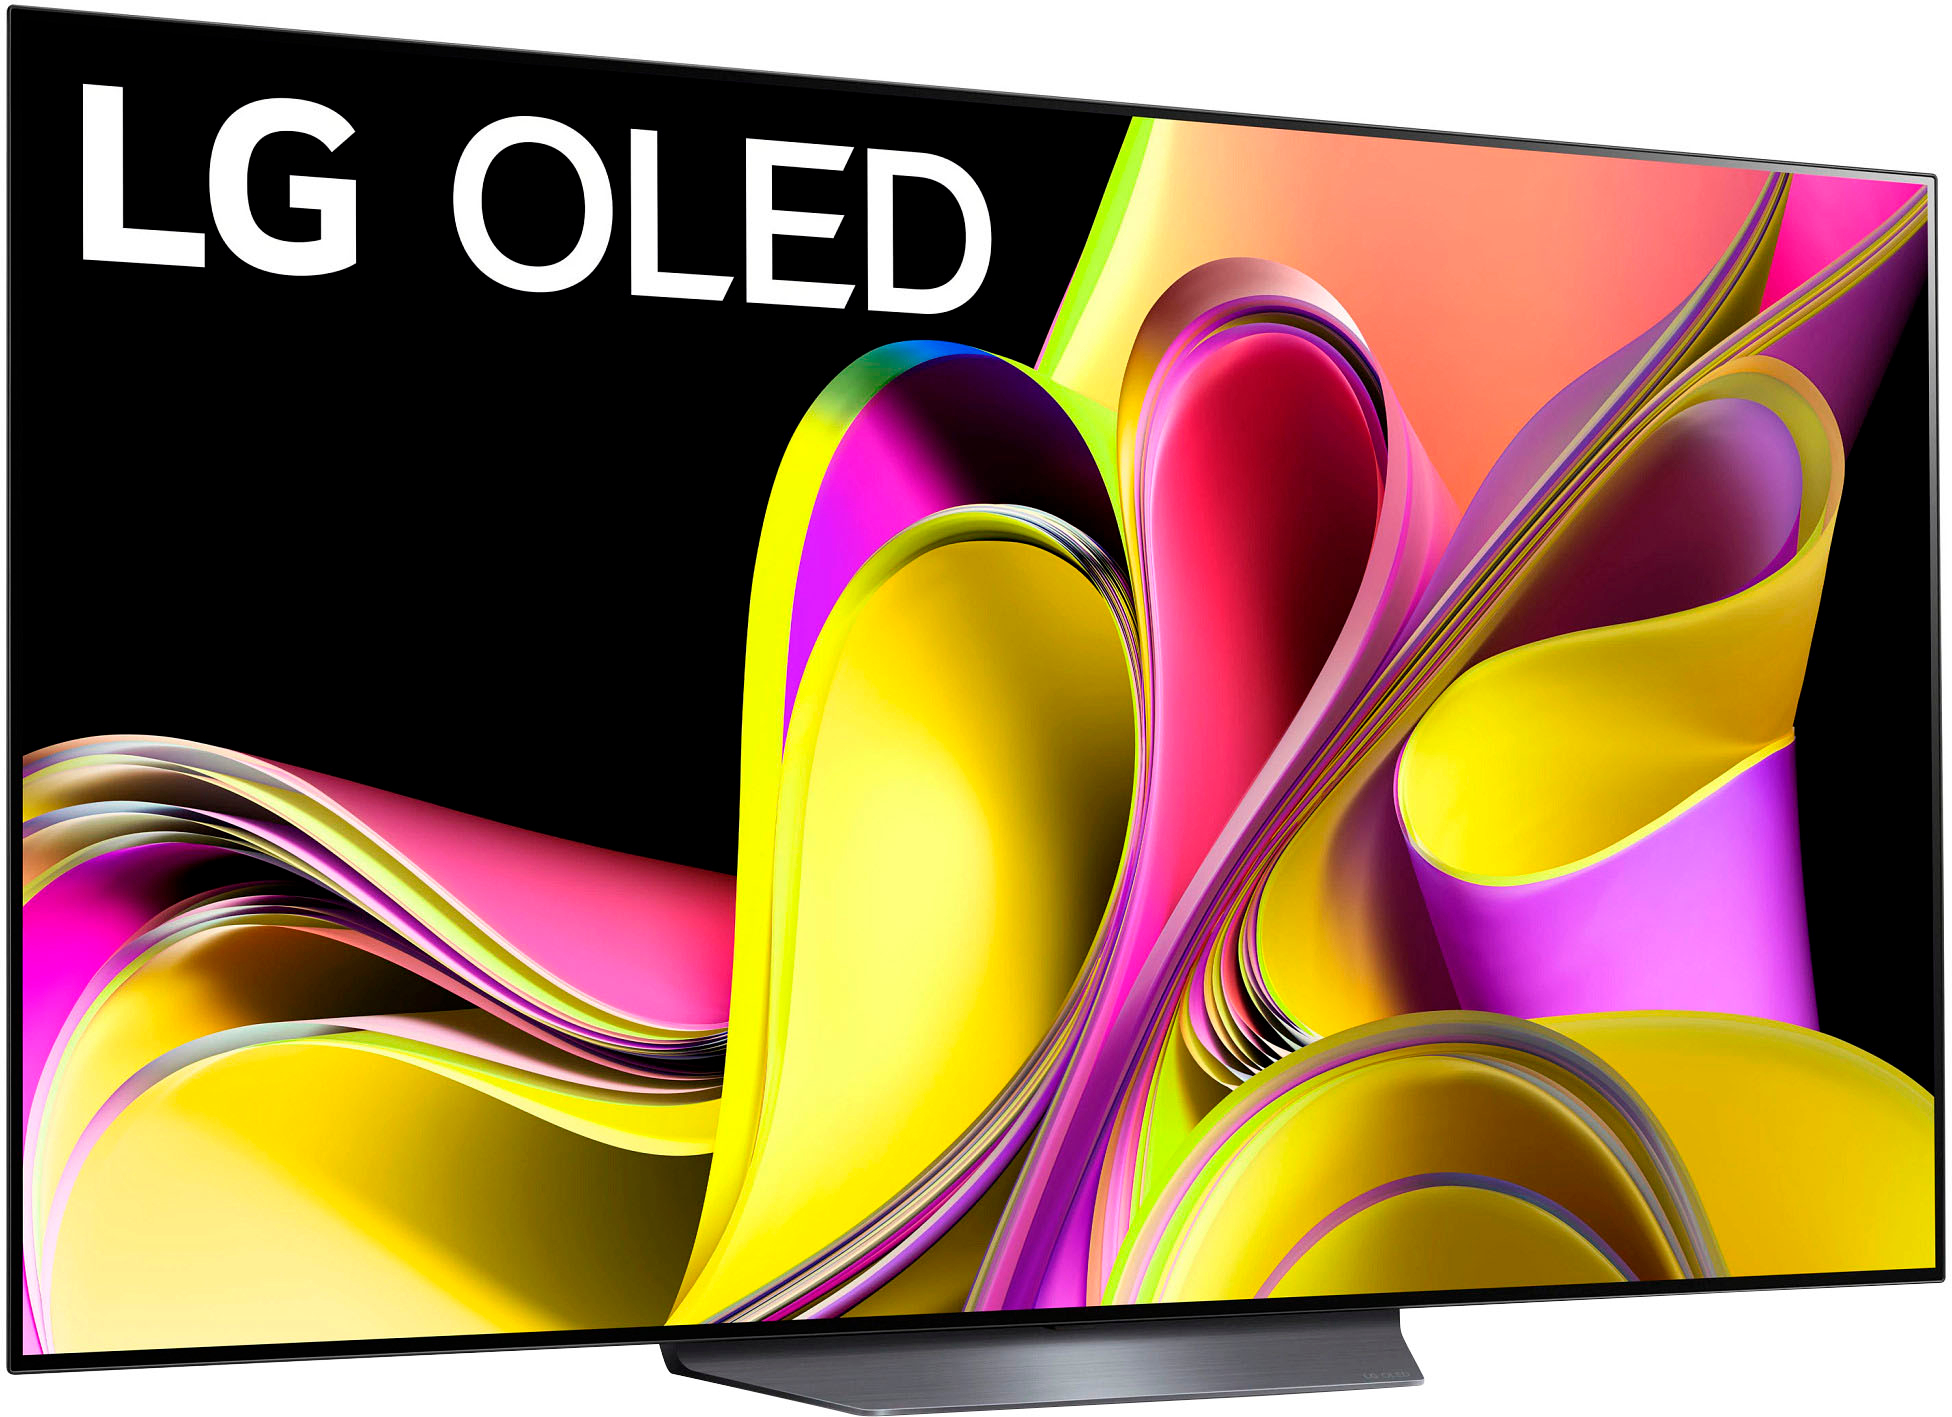 LG OLED G3 TV unboxing and mounting on its Stand 